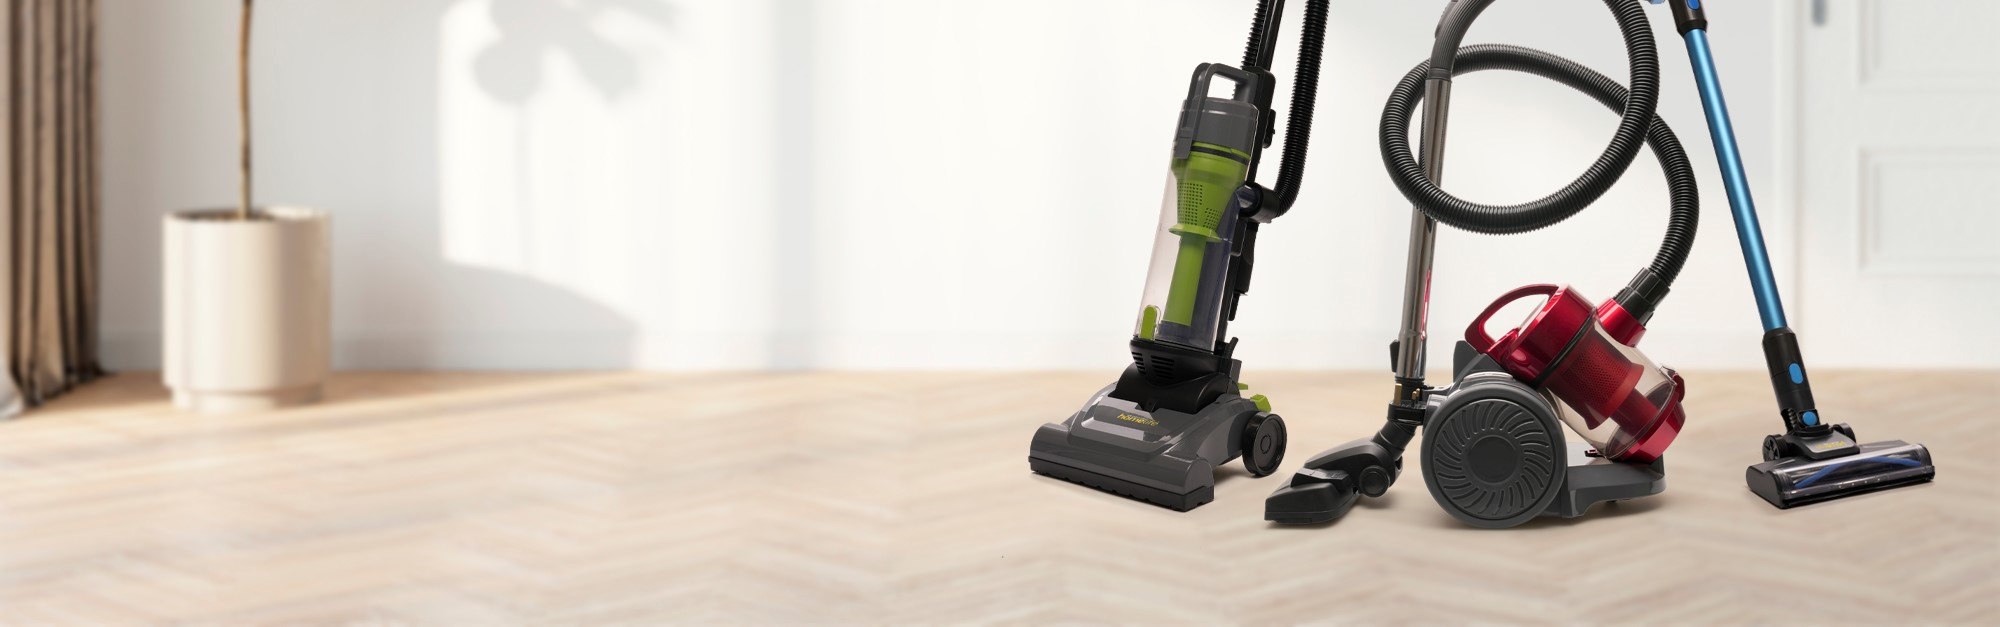 NEW CORDED AND CORDLESS VACUUMS